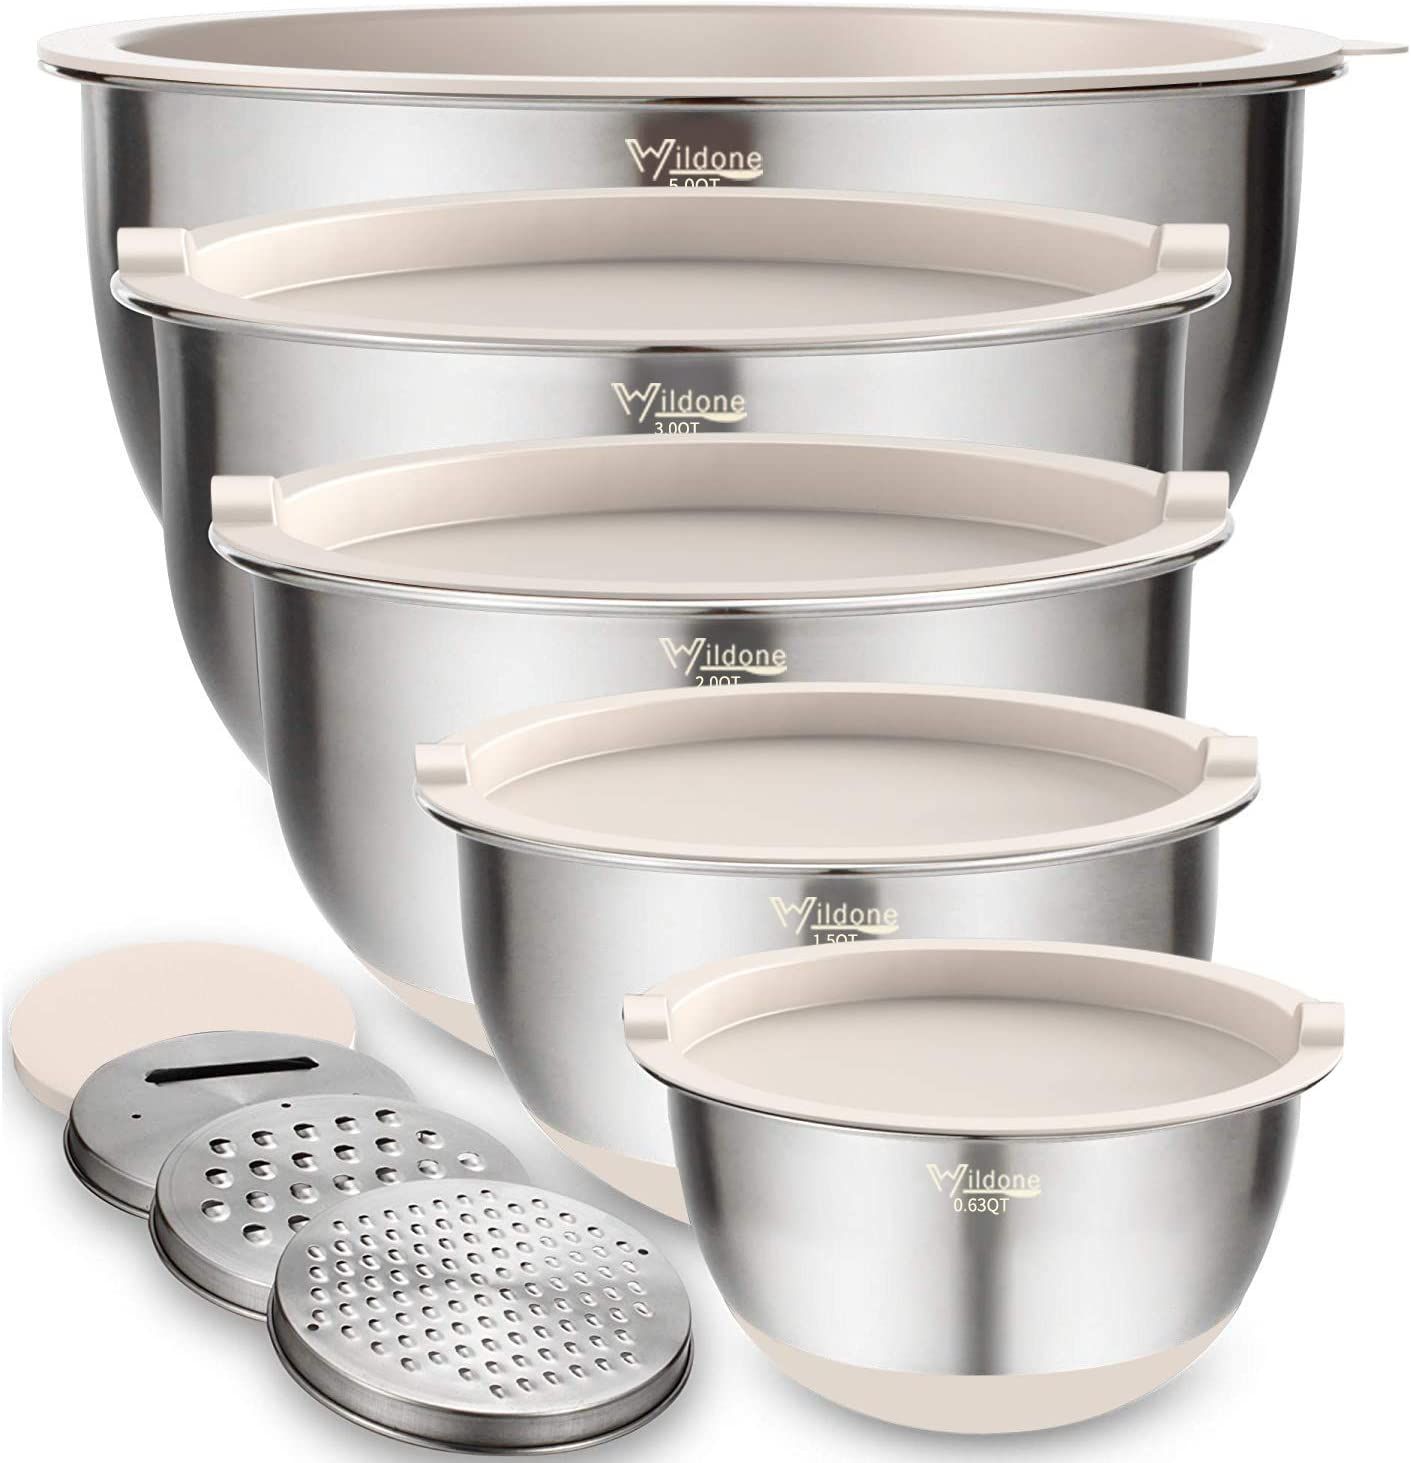 Wildone Mixing Bowls Set of 5, Stainless Steel Nesting Bowls with Airtight Lids, 3 Grater Attachm... | Amazon (US)